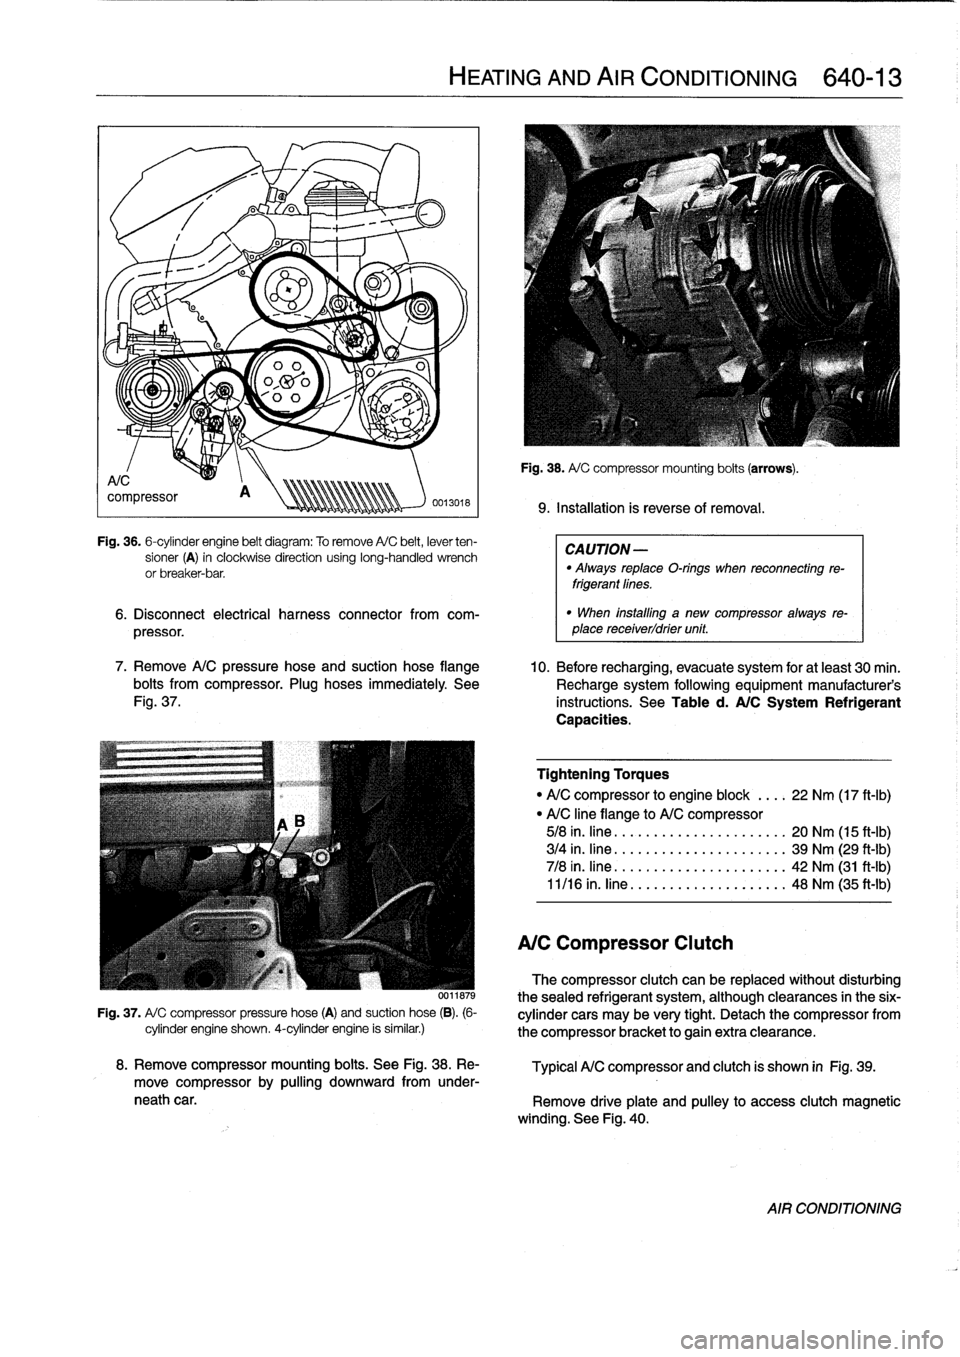 BMW 323i 1993 E36 Owners Manual 
Fig
.
36
.
6-cylinder
engine
belt
diagram
:
To
remove
A/C
belt,
lever
ten-
sioner
(A)
in
clockwise
direction
using
long-handled
wrench
or
breaker-bar
.

6
.
Disconnect
electrical
harness
connector
fr